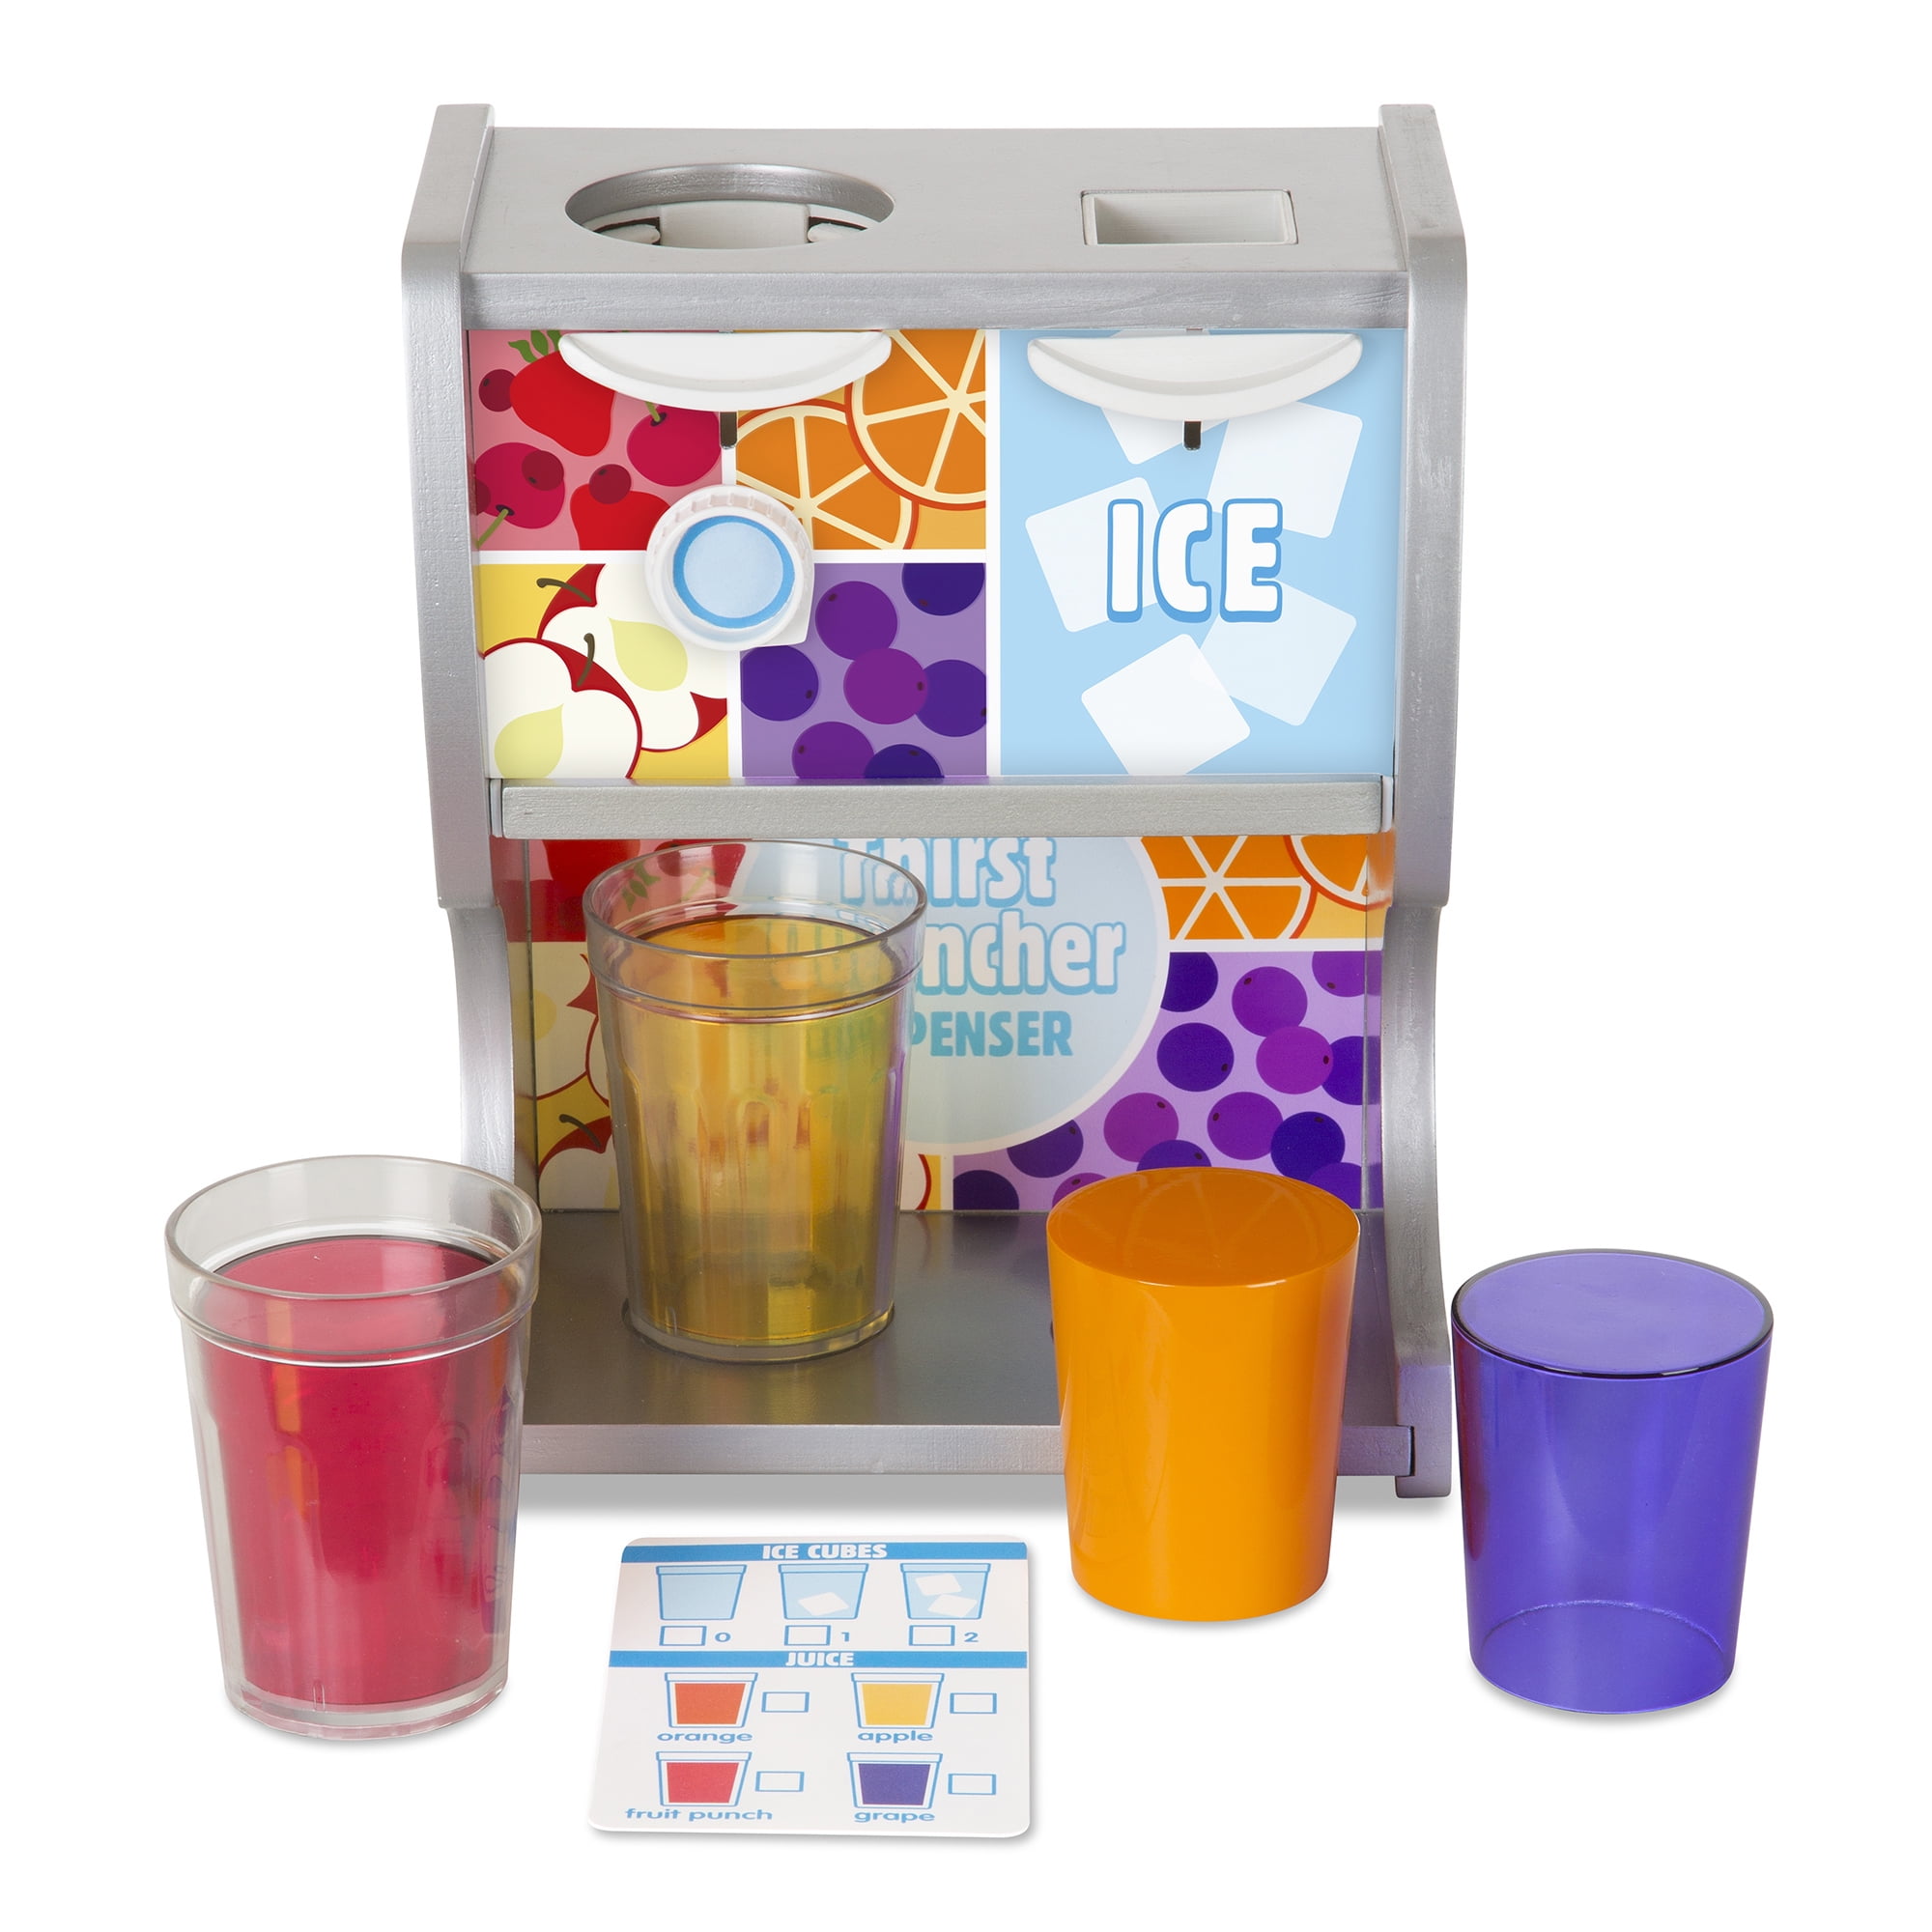 Returned Melissa & Doug Tip and SIP Toy Juice Bottles With Activity Card SH for sale online